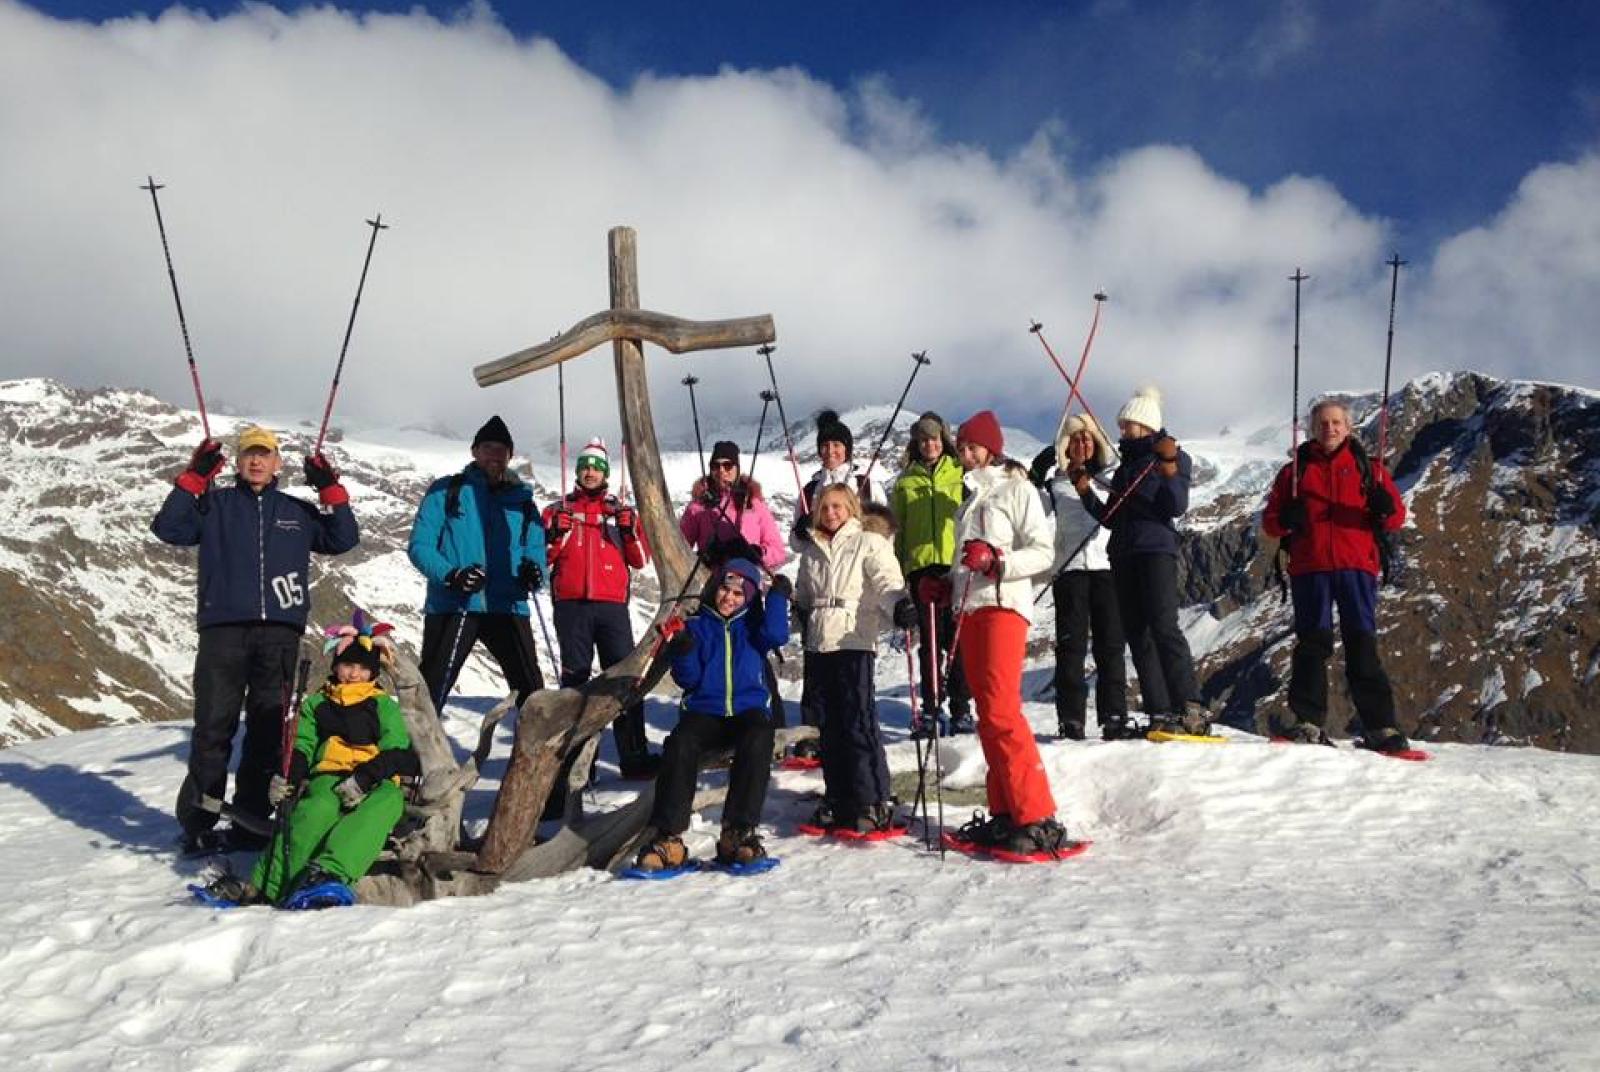 EXCURSIONS WITH THE ALPENSTOCK NATURE GUIDES